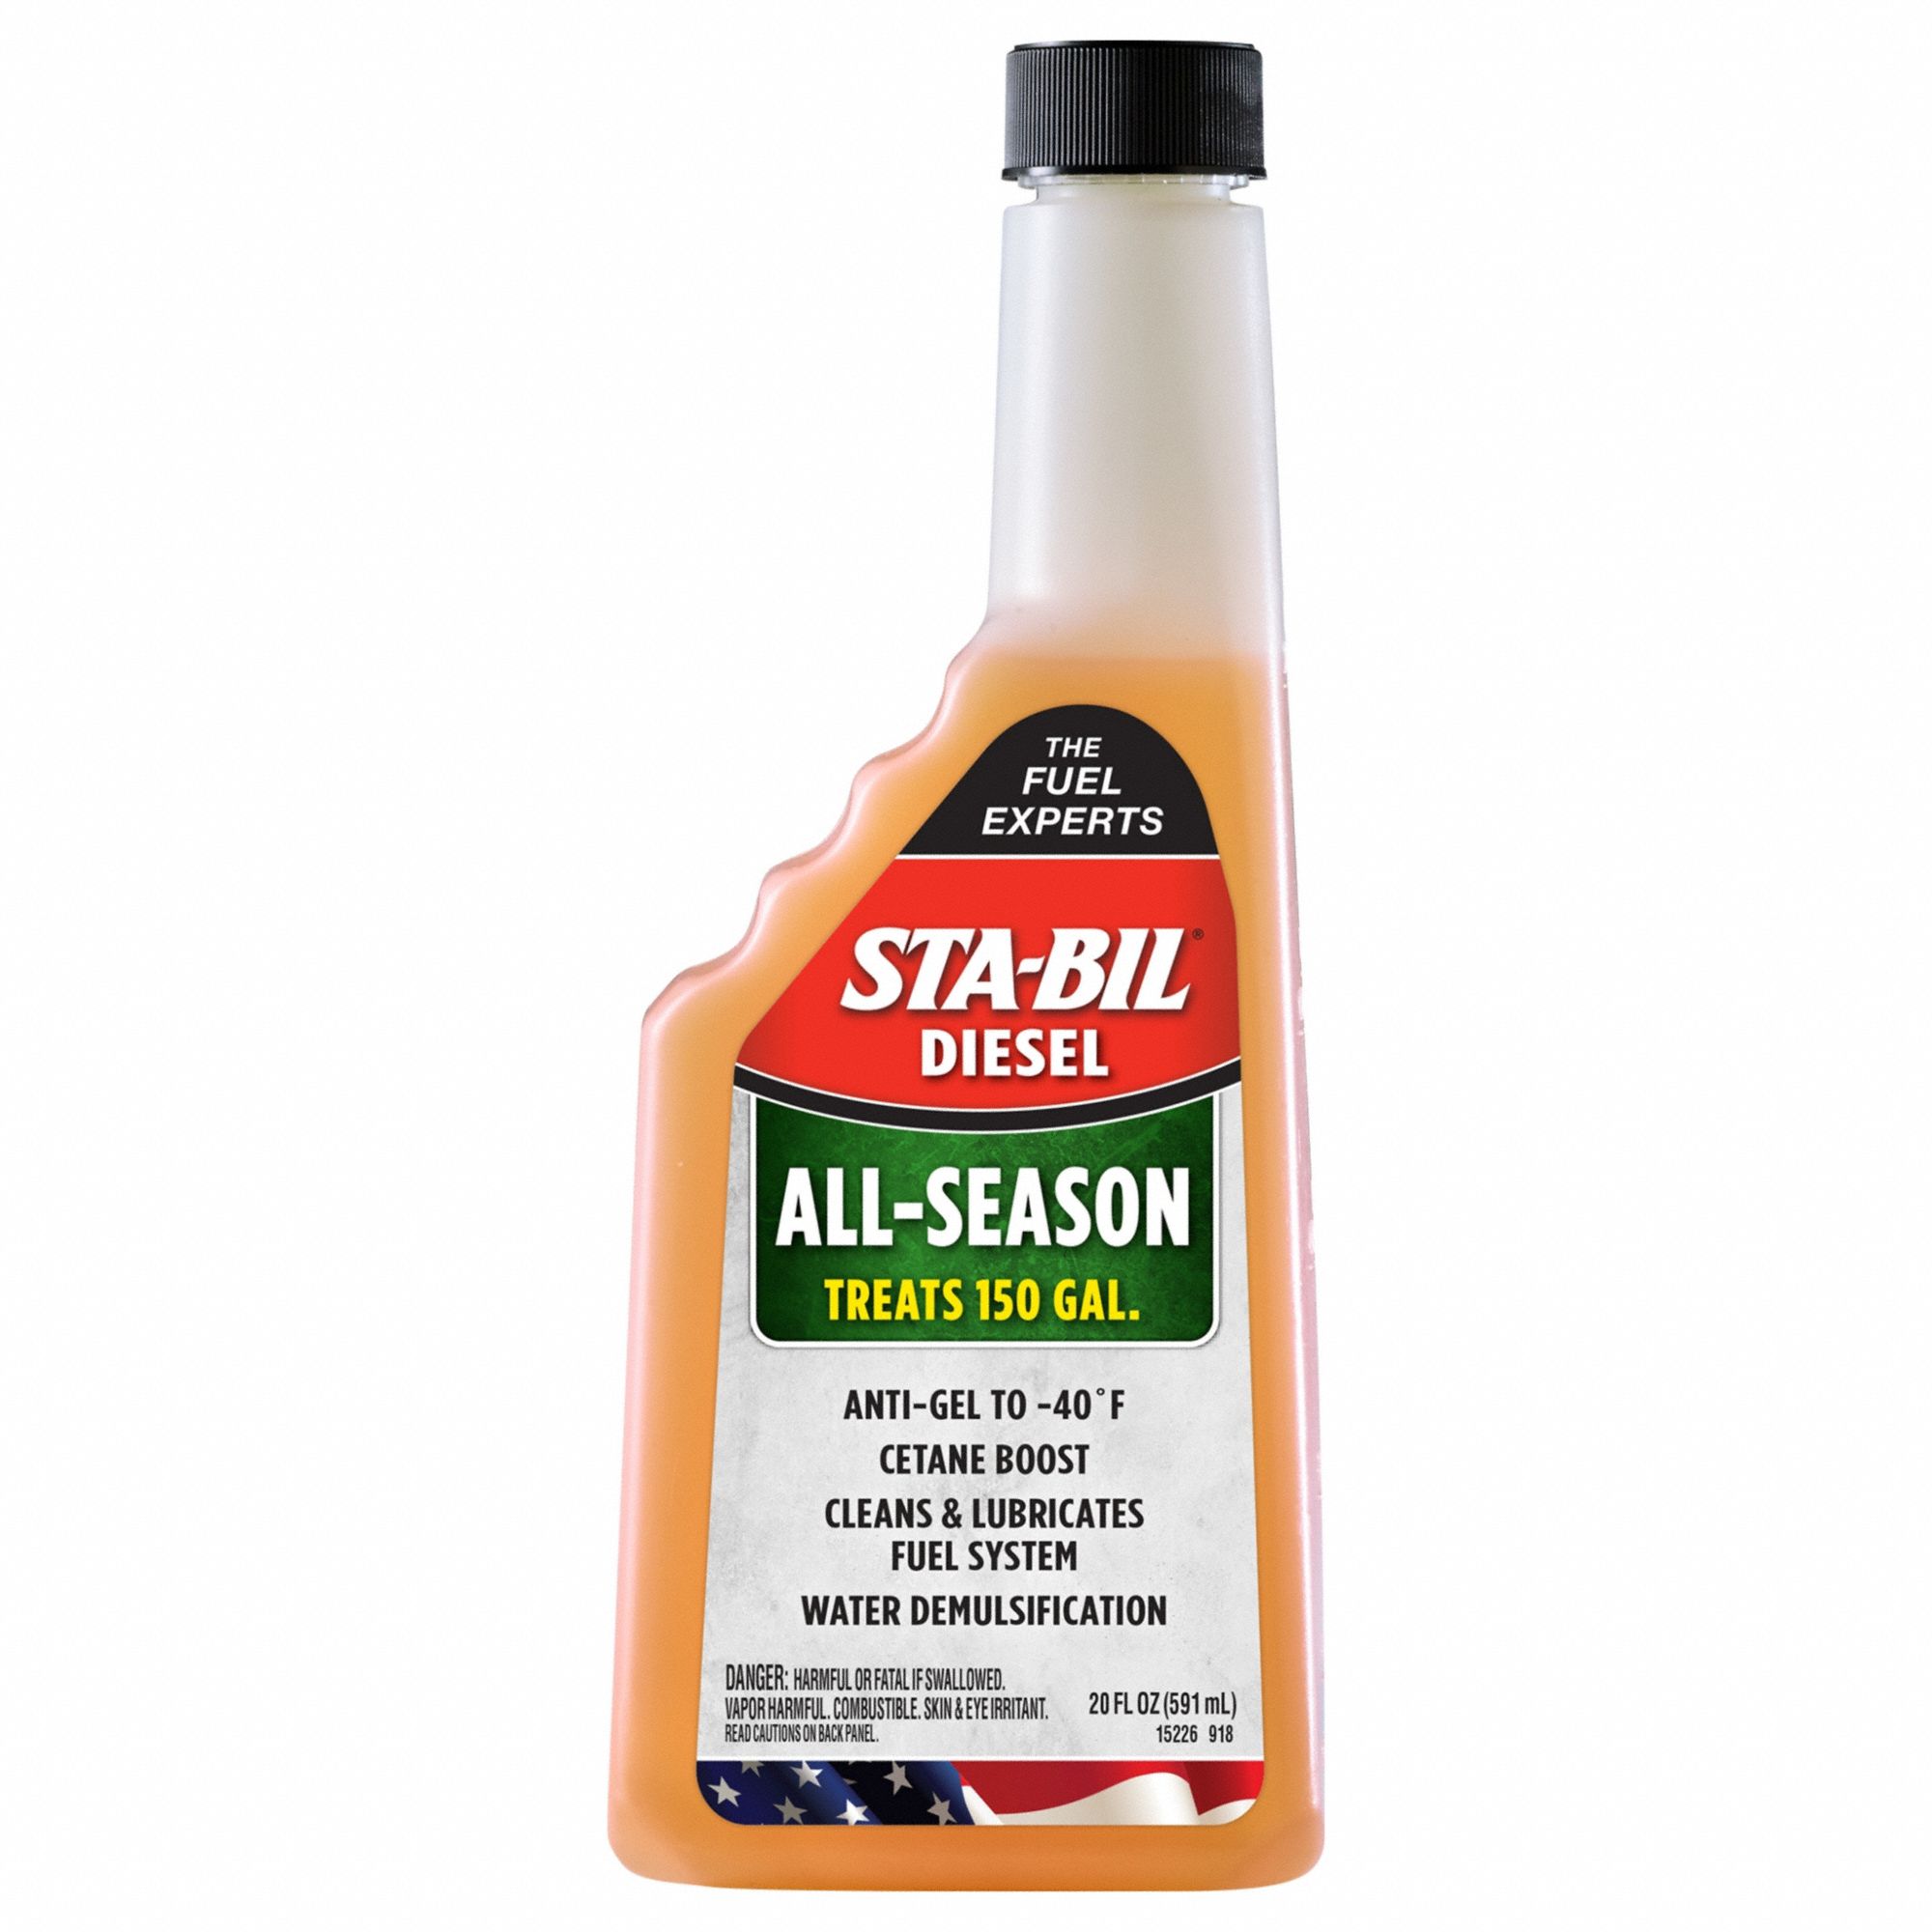 Diesel System Cleaner and Cetane Booster: All-Season, Cetane, 20 fl oz Container Size